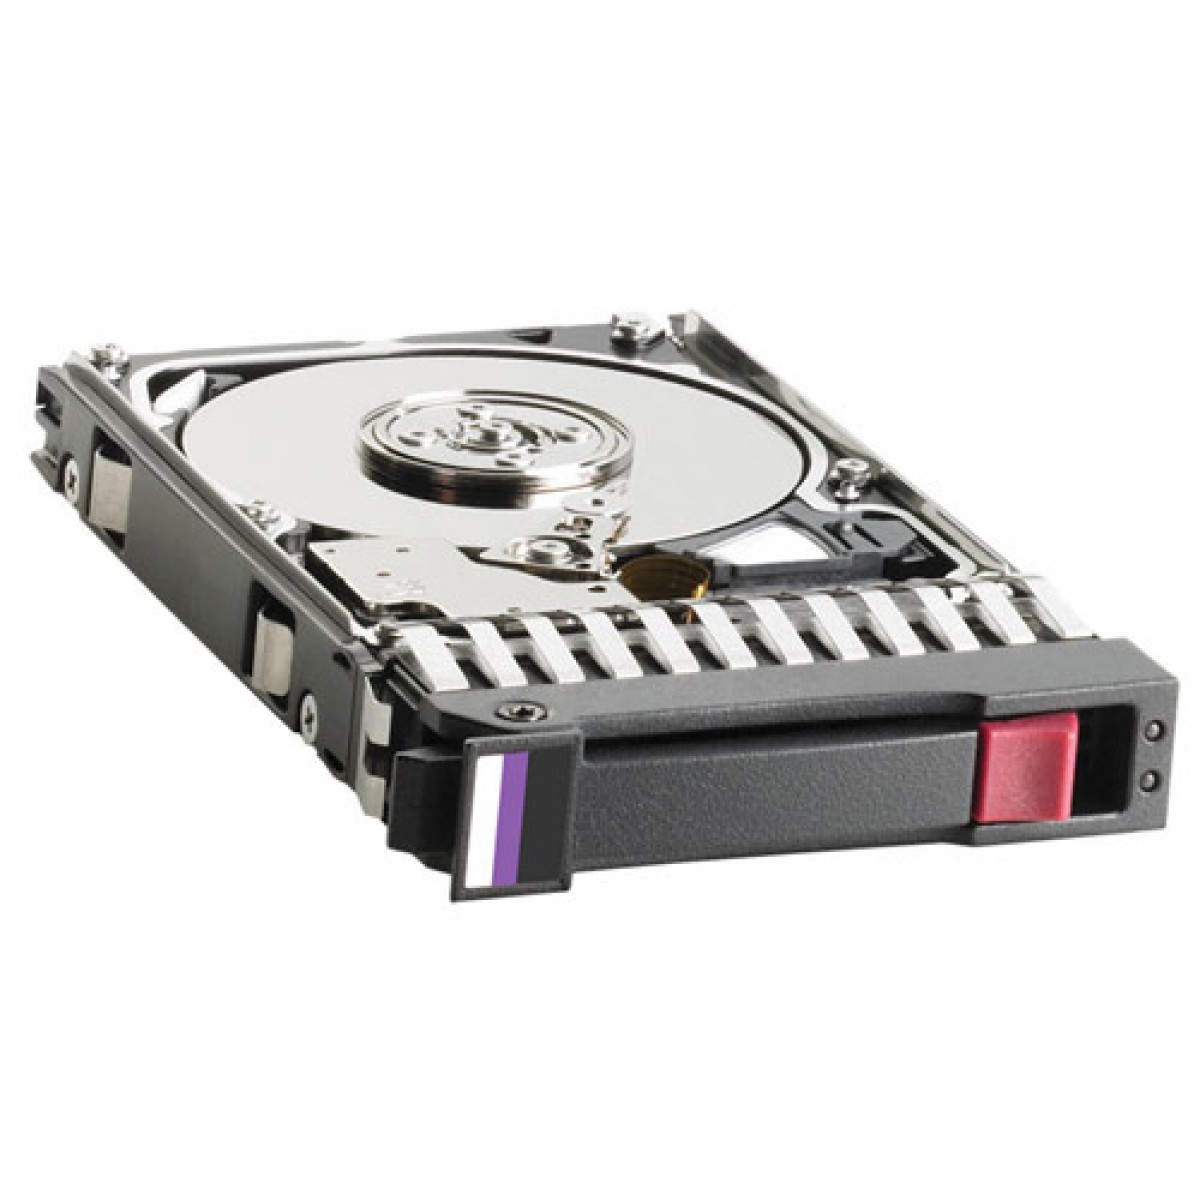 336381-001 | HP 9.1GB 10000RPM 80-Pin Wide Ultra-3 SCSI 3.5-inch 1.0-inch Height Hot-pluggable Hard Drive